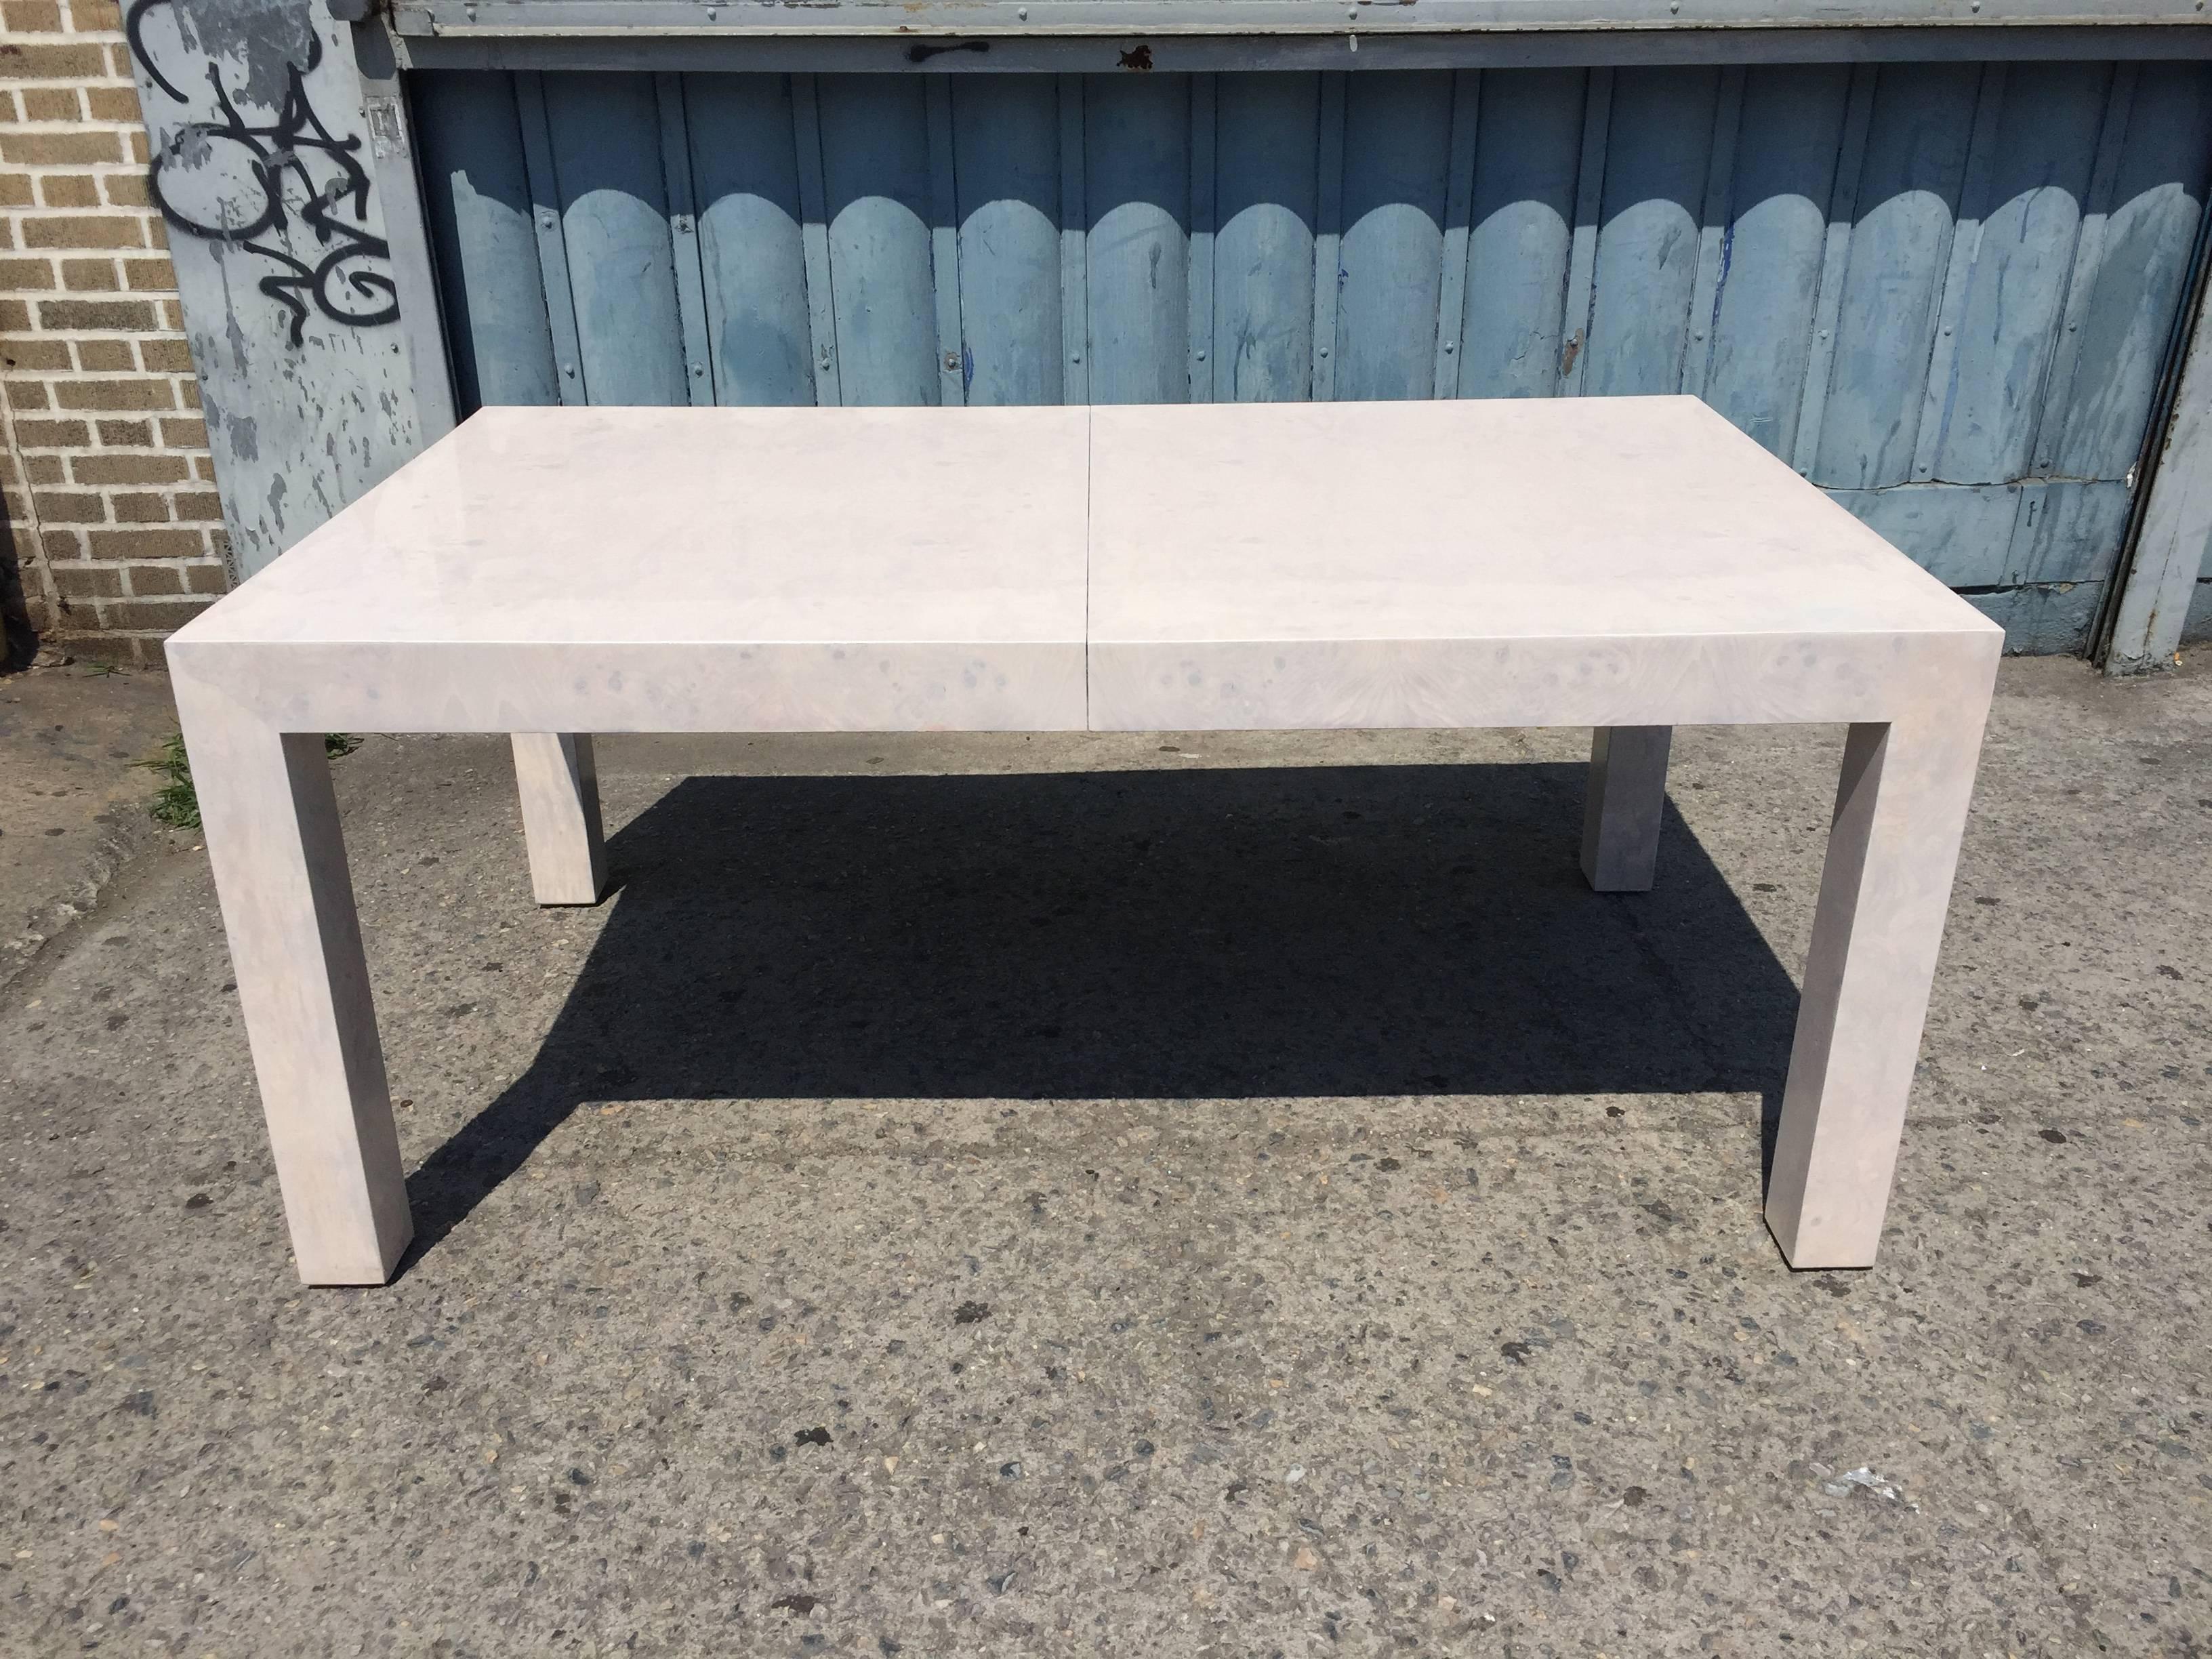 Whiteweashed burled parsons design dining table by Milo Baughman, this table Is designed to but does not have any leaves, thus this item has been posted as clearance.  The finish is professional and this table is absolutely stunning.
